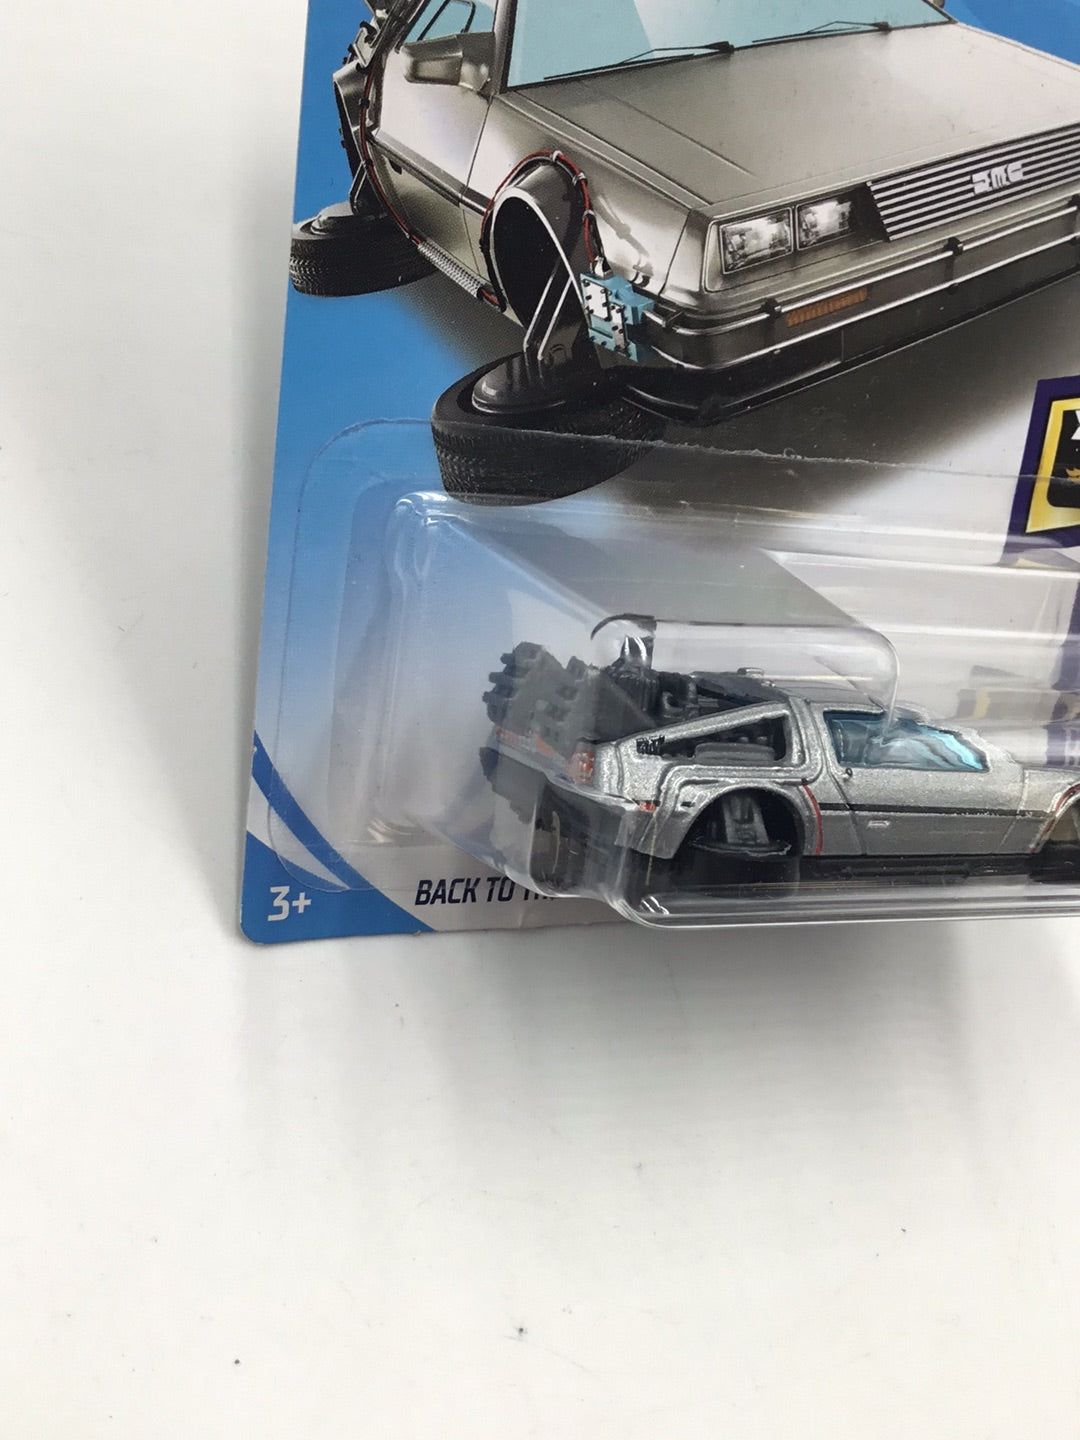 2019 hot wheels #108 Back to the future Time Machine hover mode